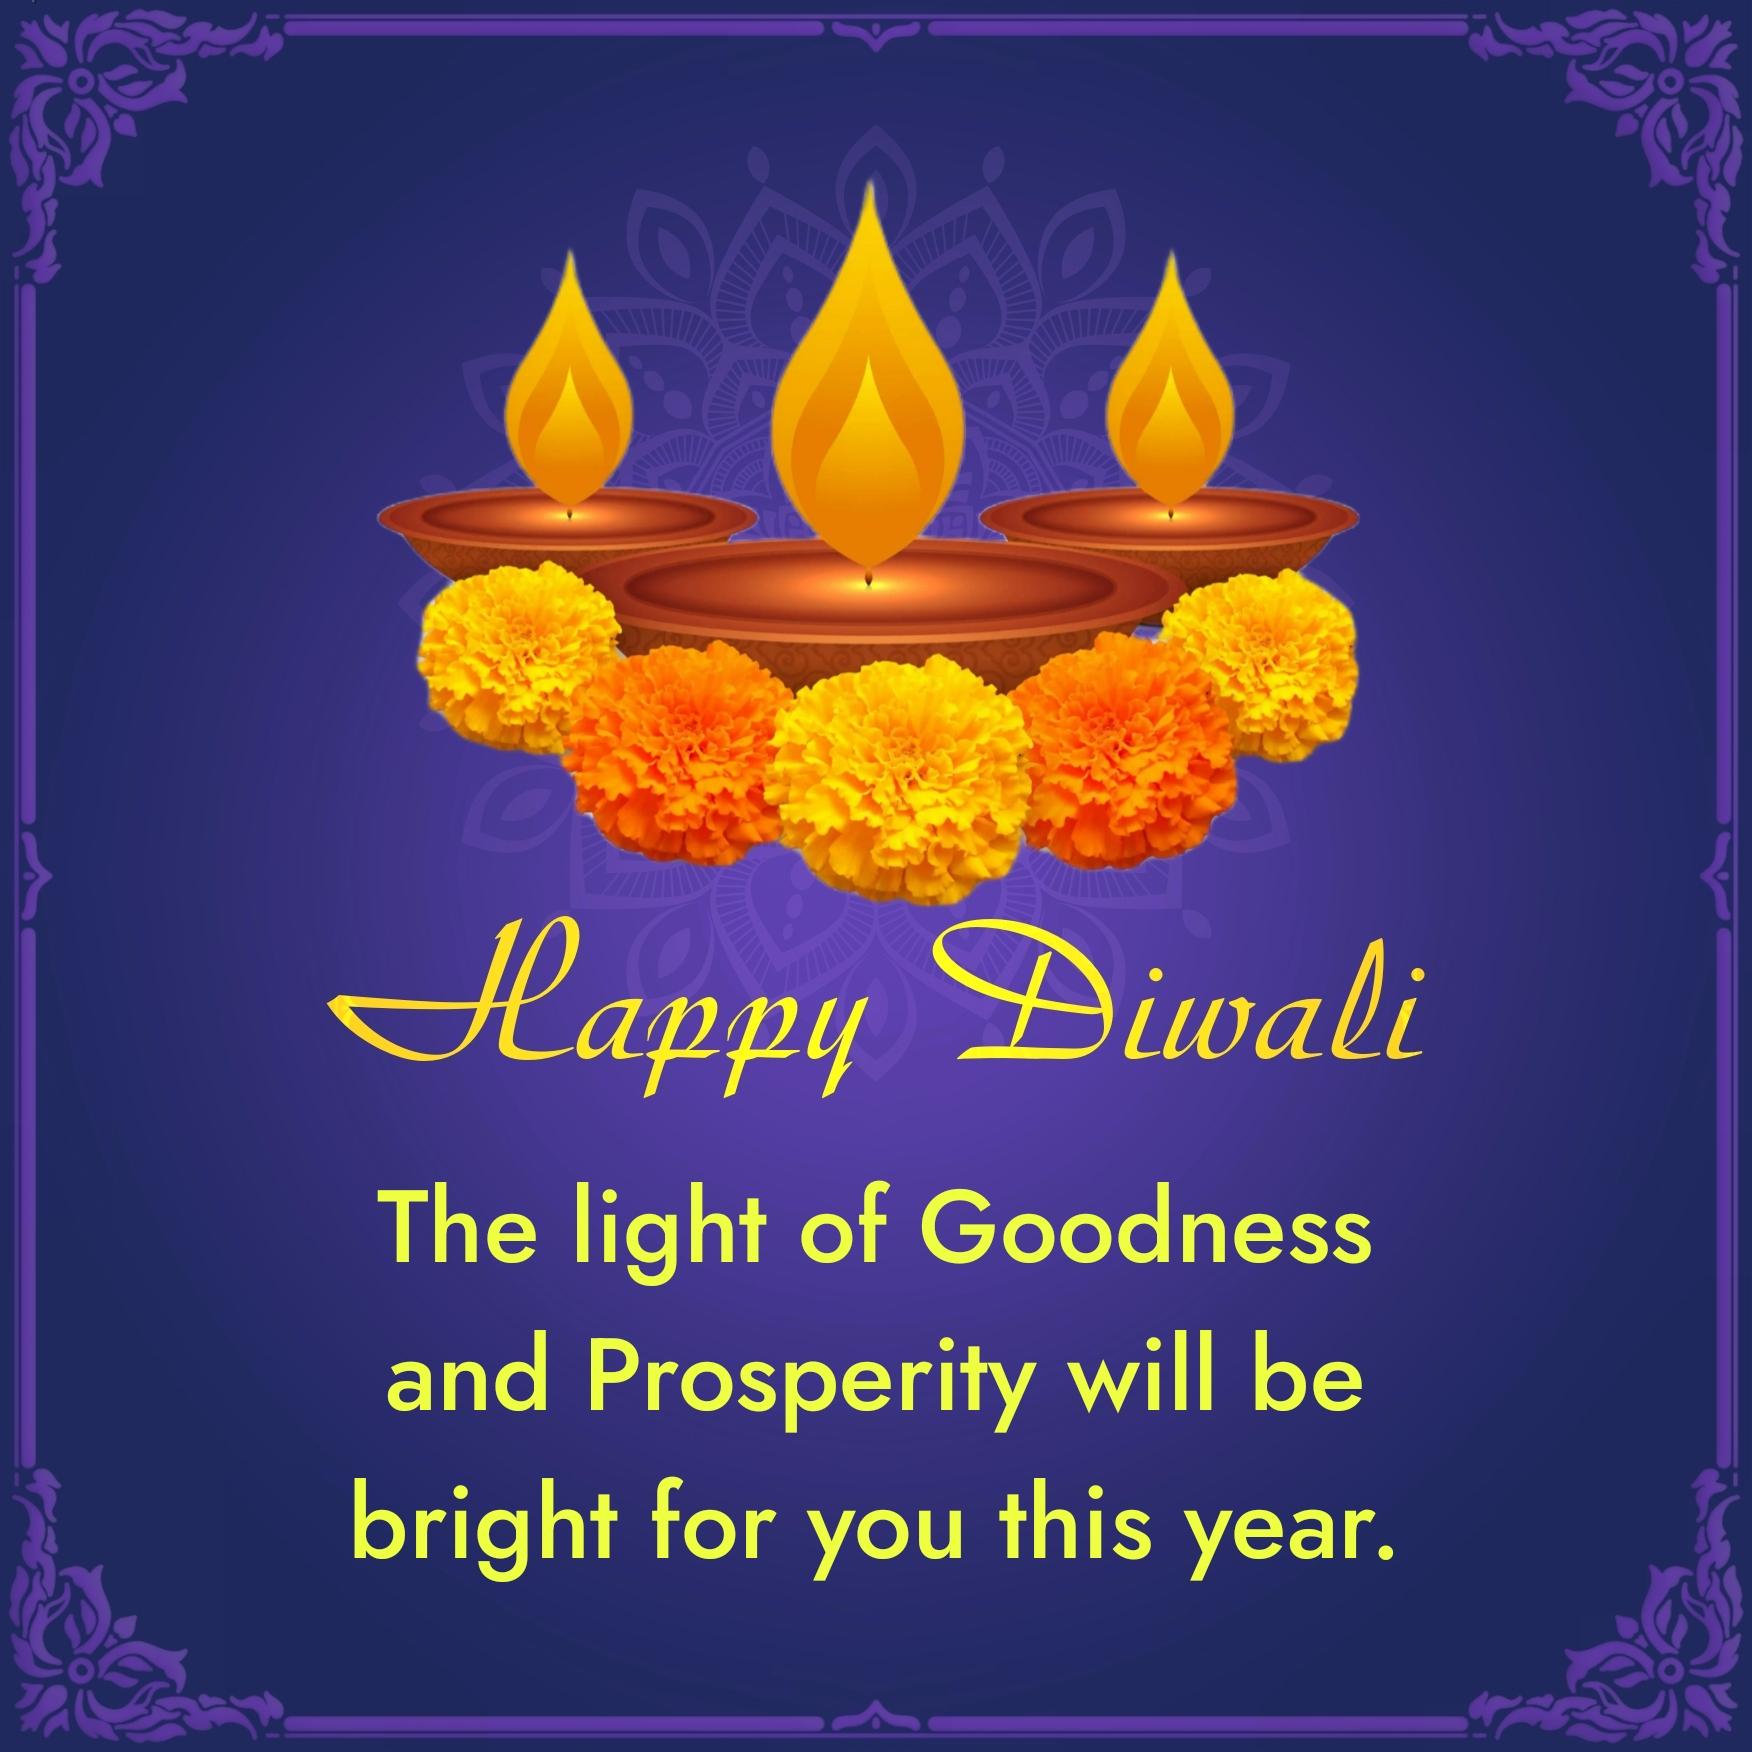 The light of Goodness and Prosperity will be bright